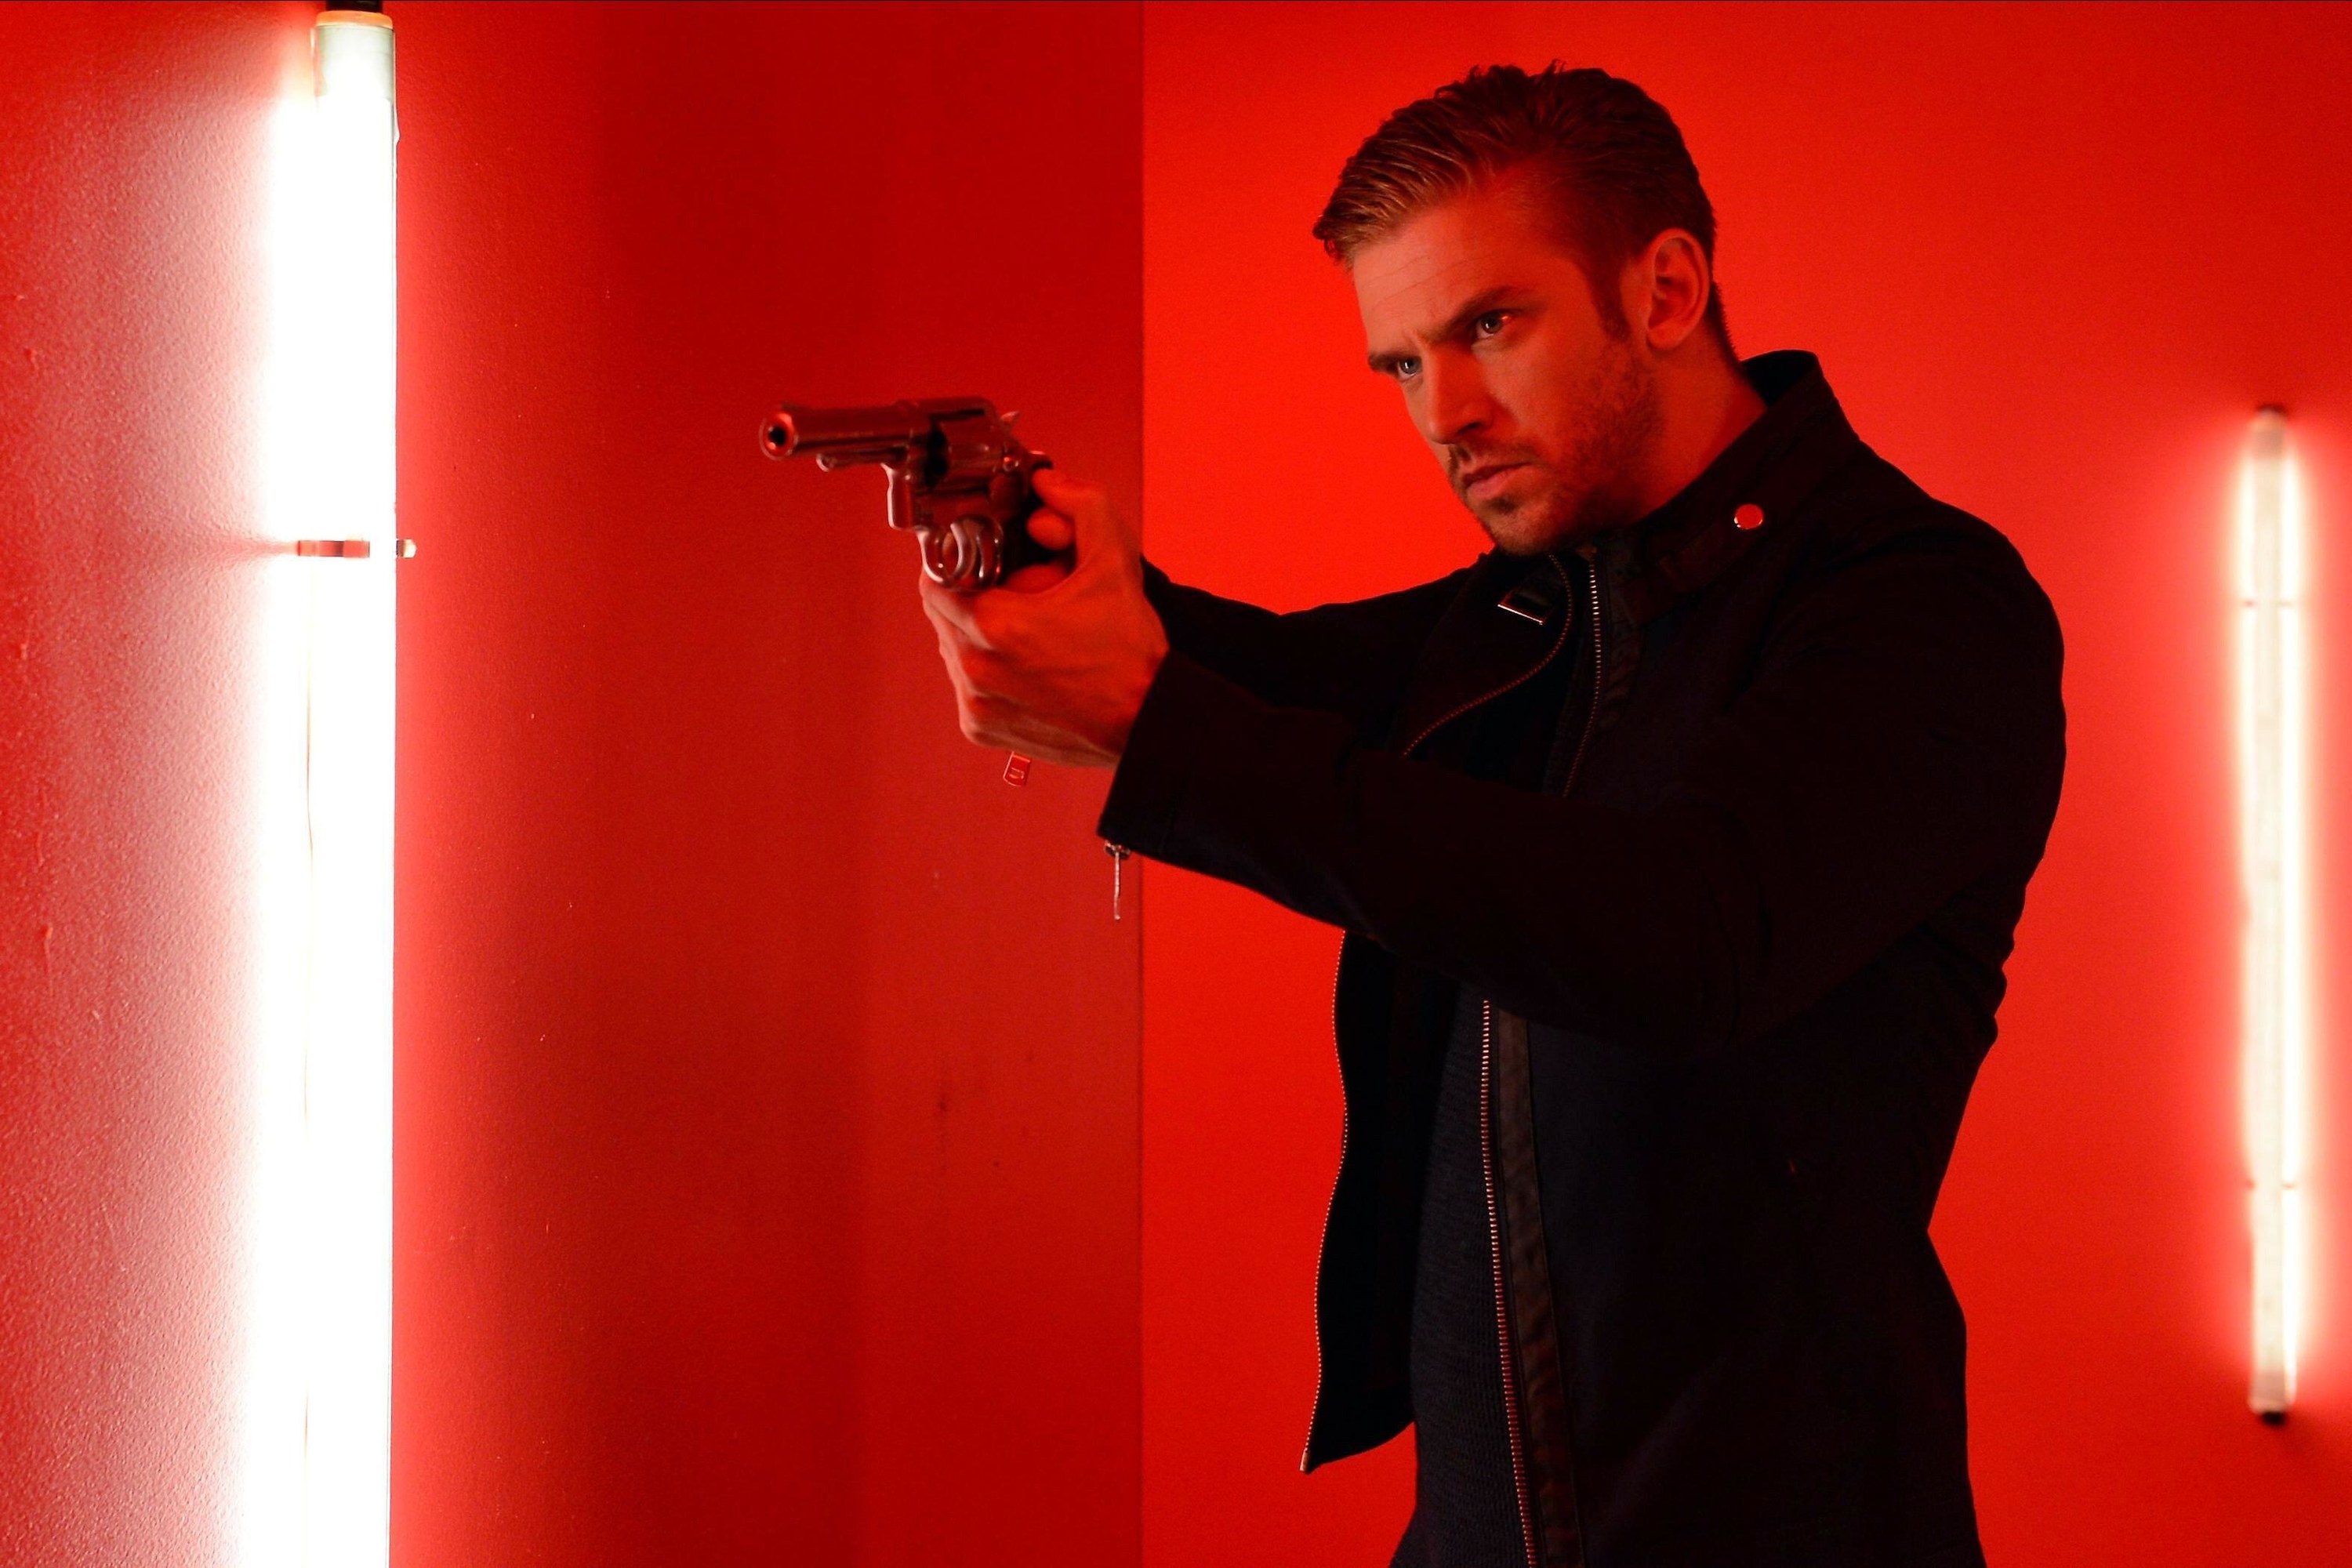 Dan Stevens holds a revolver in a bright red room